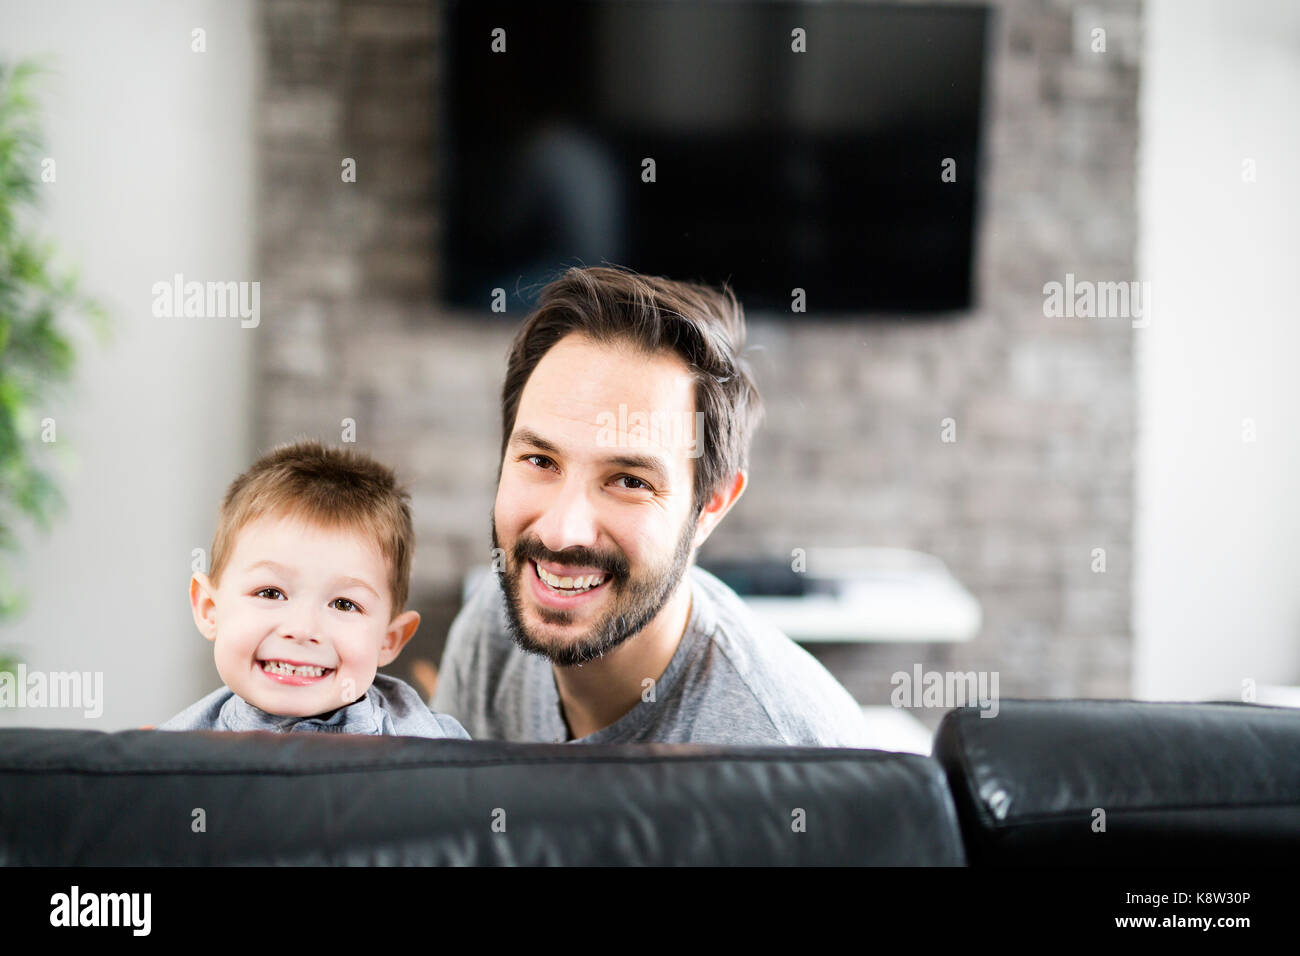 Father And Children On Sofa At Home Watching TV Together Stock Photo